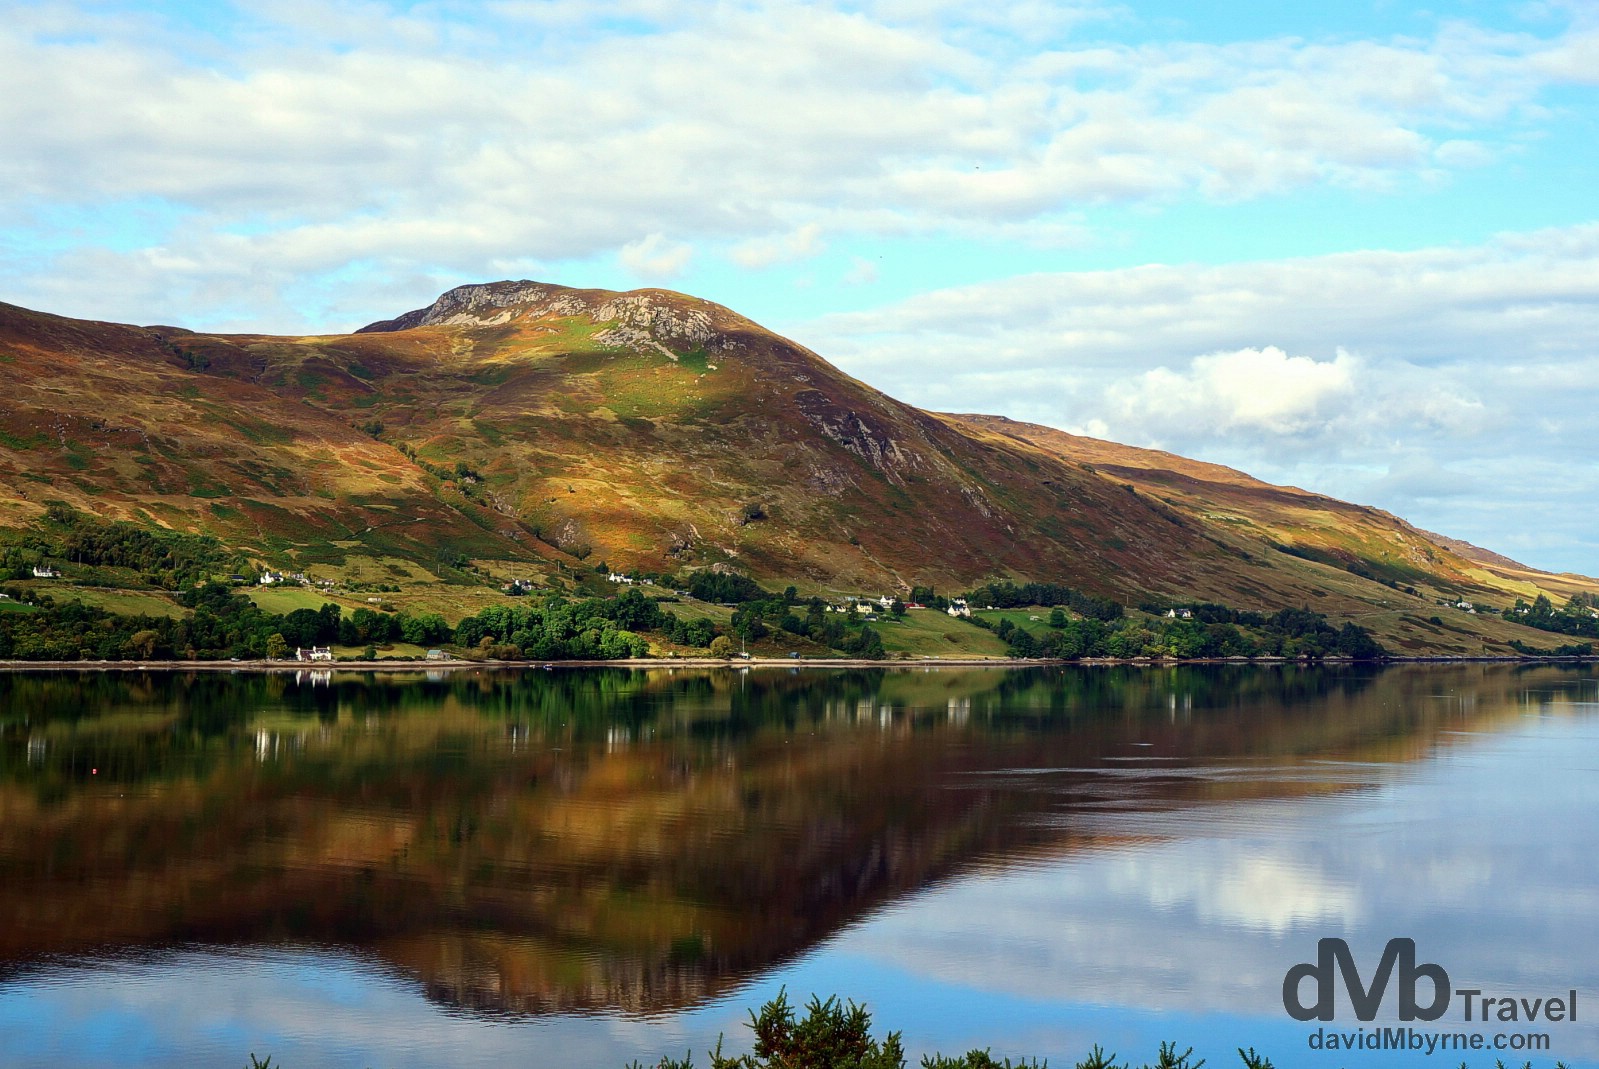 Reflections of the western shore of Lock Broom, Highlands, Scotland. September 16, 2014.